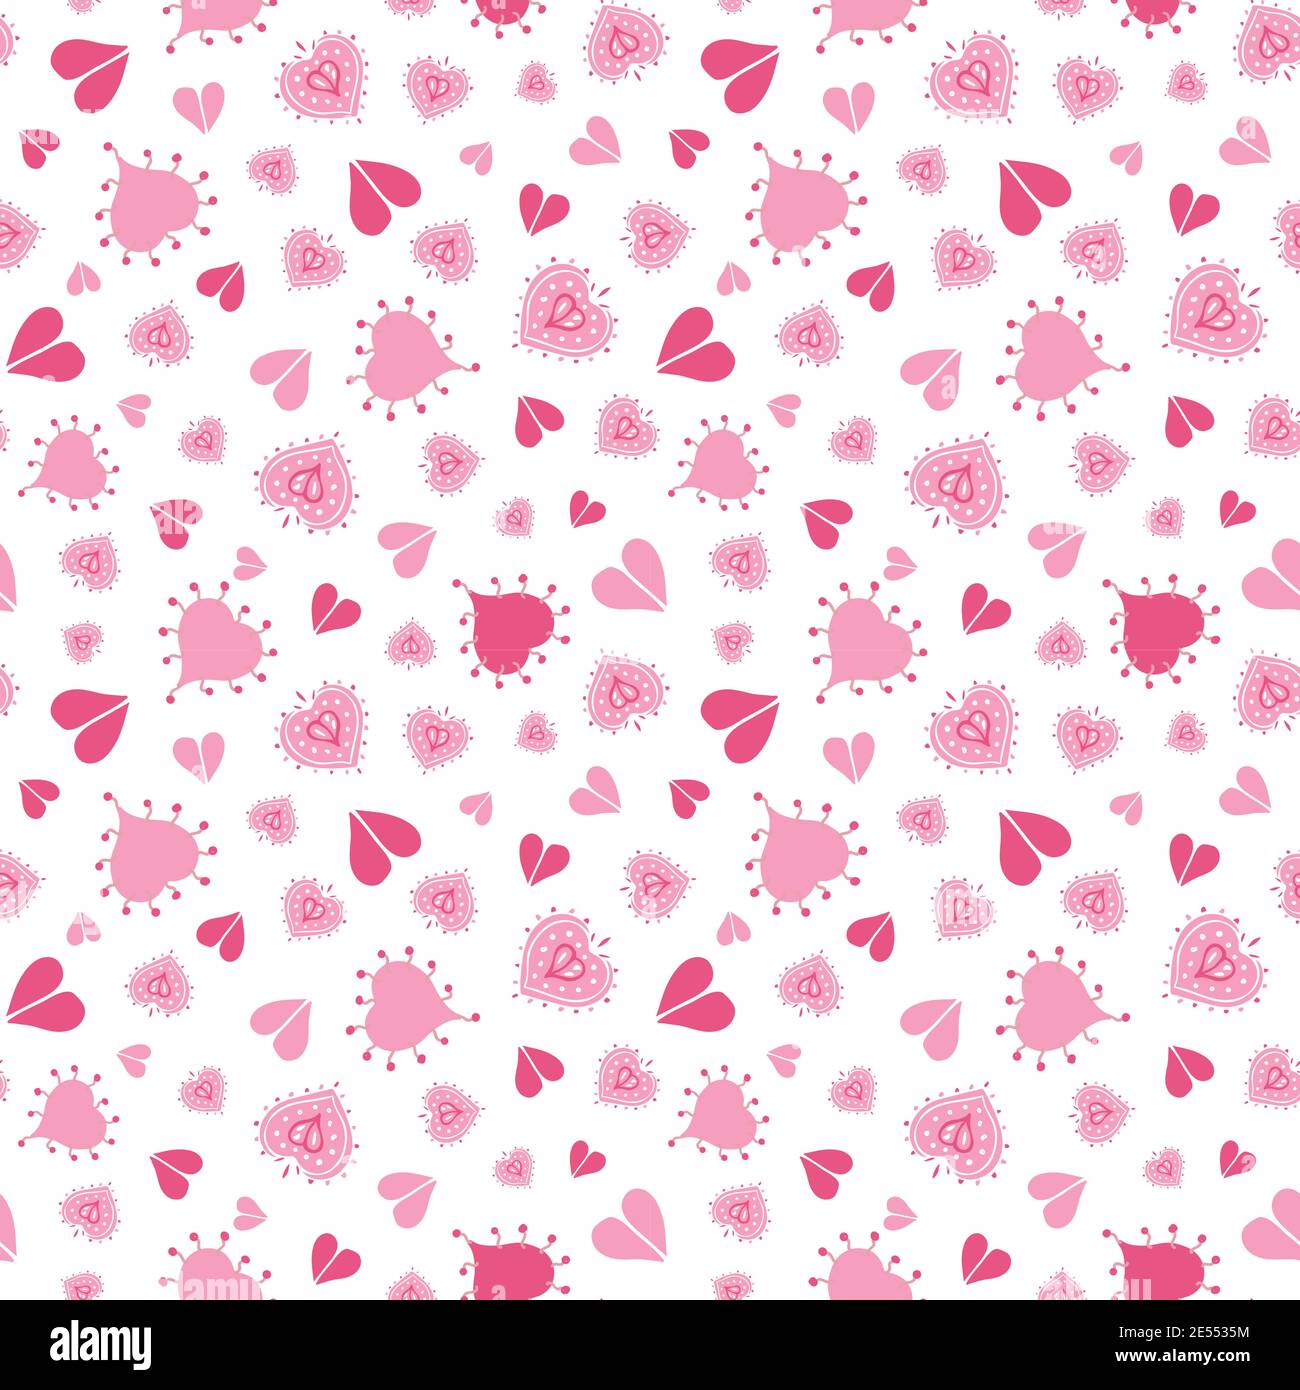 Doodle Heart Shape Pattern Seamless Vector Repeat Background. Girly Allover Design With Hand Drawn Heart and Dot. Close Up, All Over Repeat. Stationery, Valentine, Wedding, Packaging. Vector EPS 10 Tile. Stock Vector